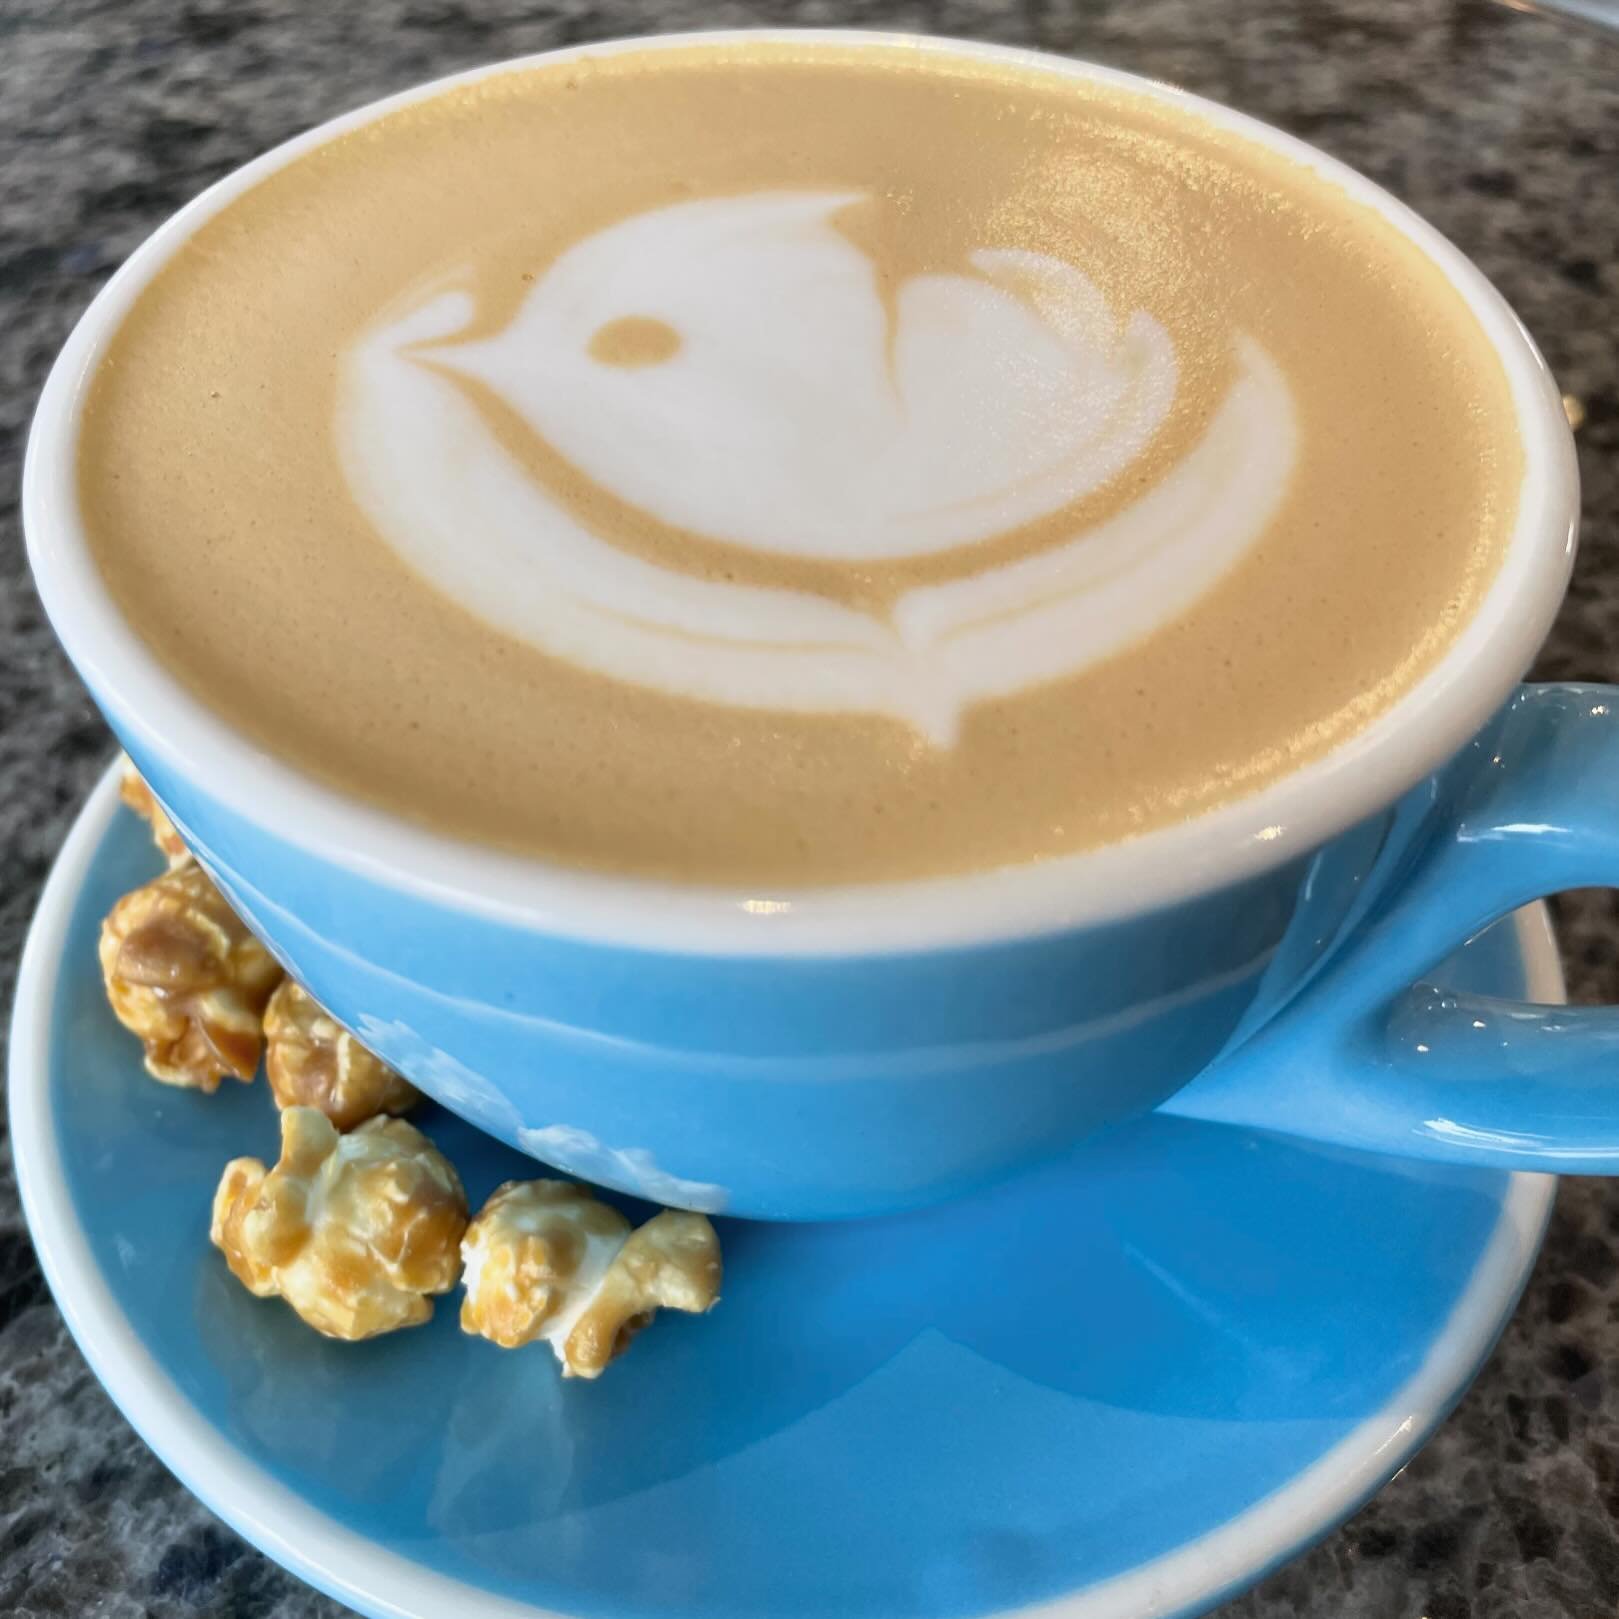 This Caramel Corn Latte is quite possibly one of our favorites yet! Only 2 more weeks to get a Caramel Corn Latte make sure you get one you won&rsquo;t be sorry!!! And bonus $1.00 from each of these lattes sold will be donated to @partnersforourcommu